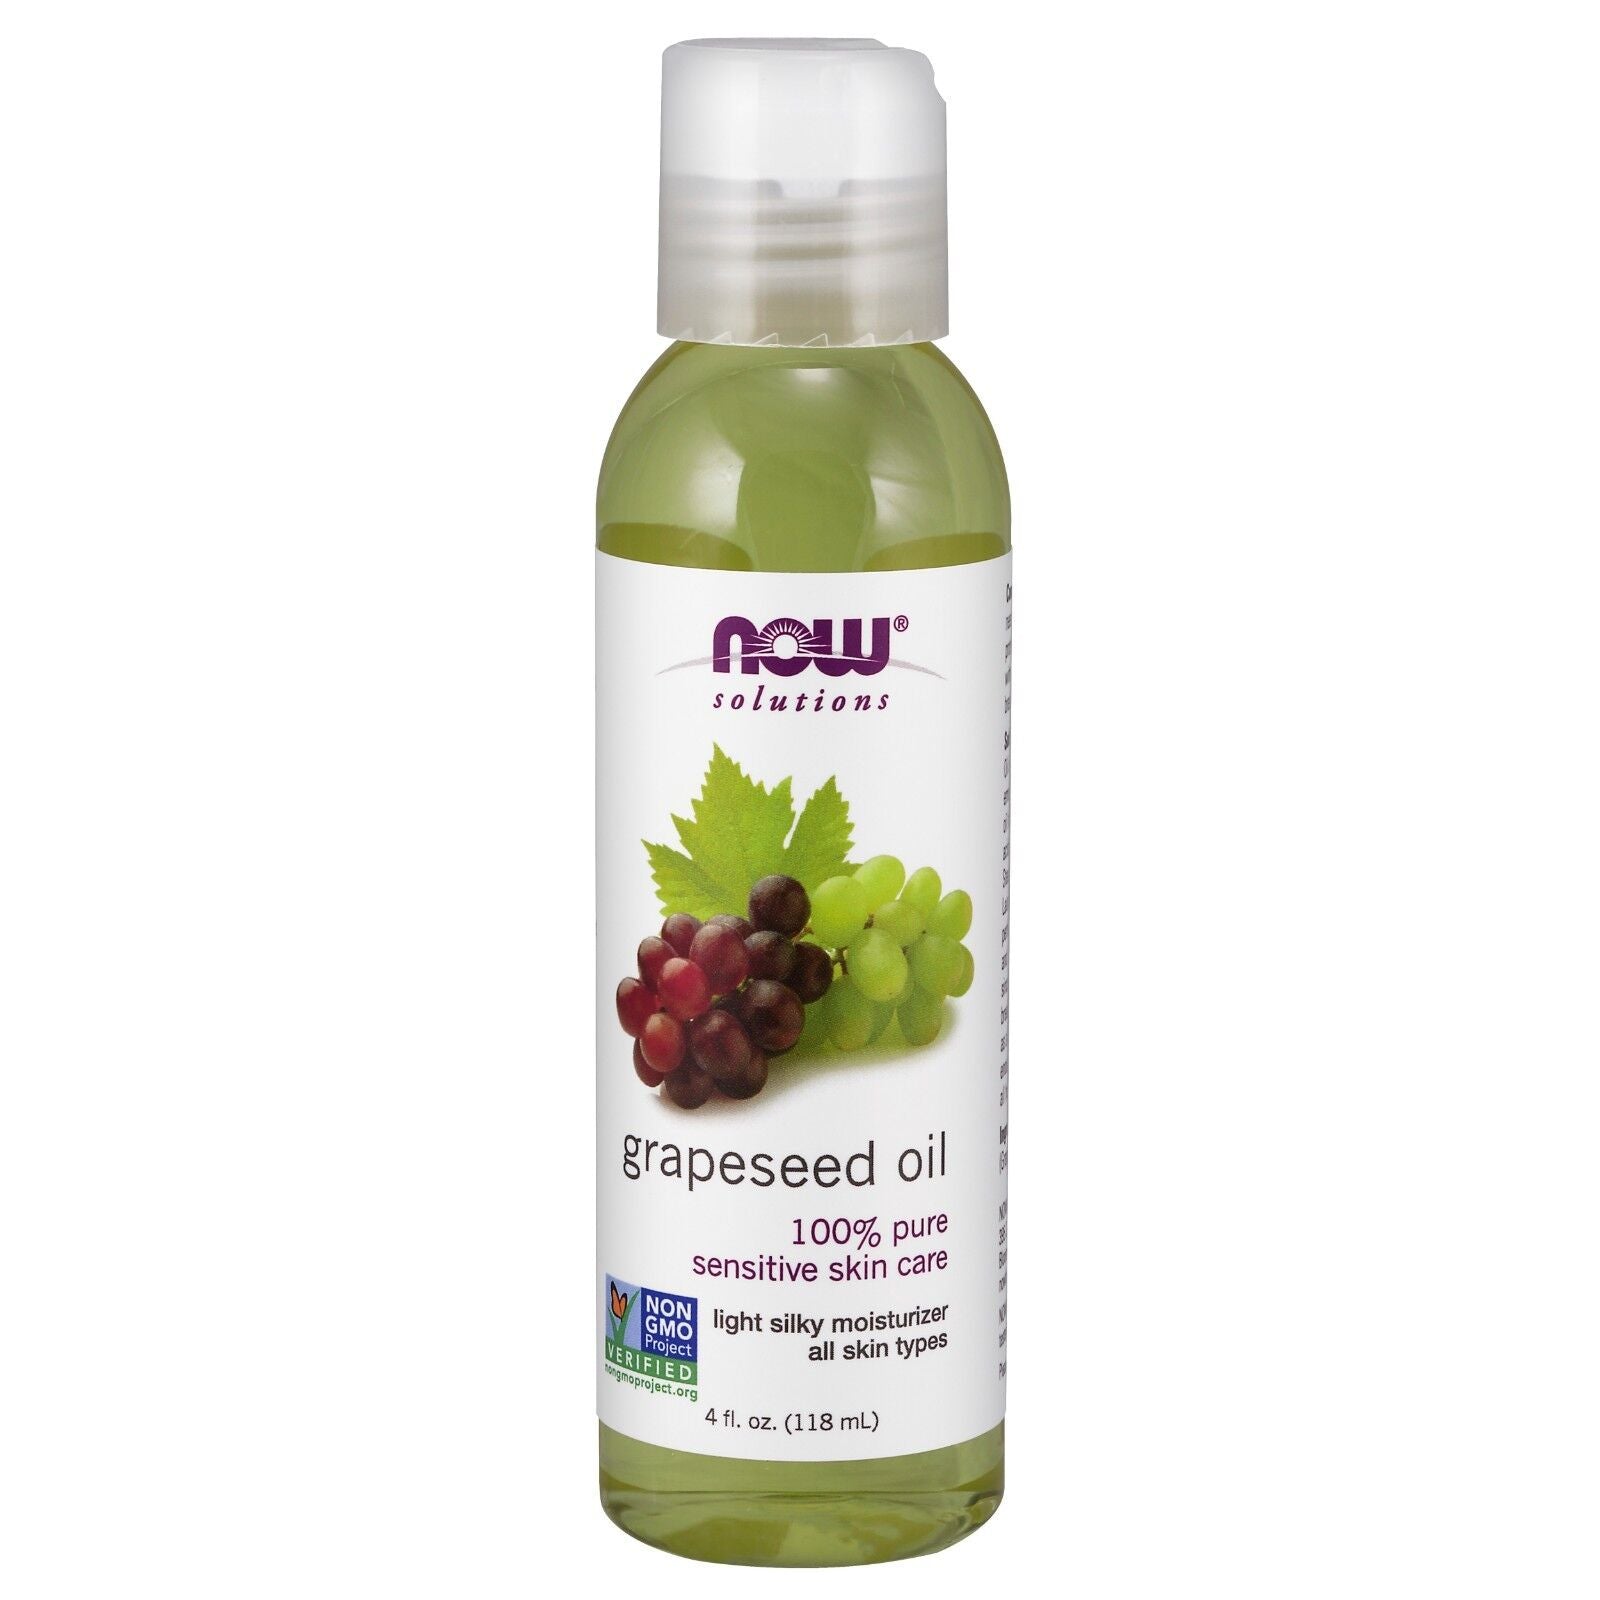 NOW Foods Grapeseed Oil, 4 fl. oz.